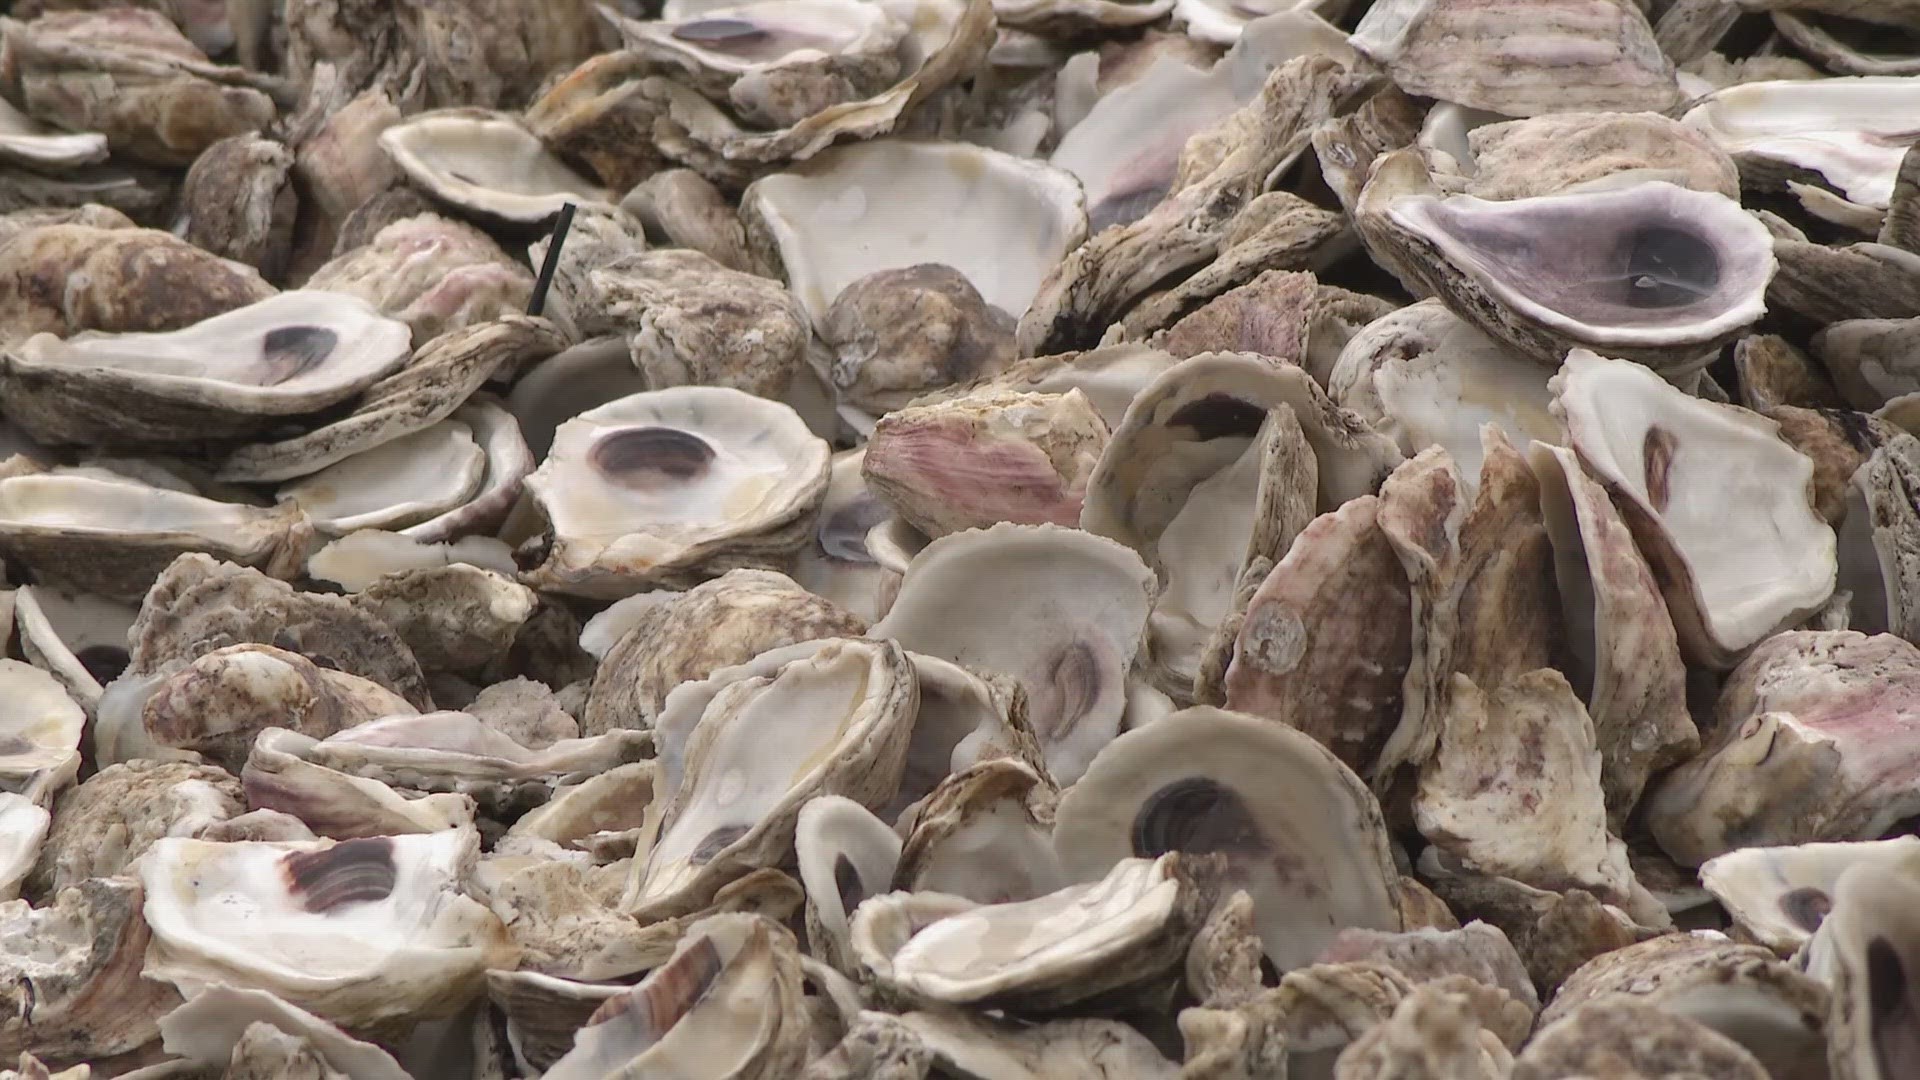 You can help restore Galveston Bay by eating at the restaurants that participate in the oyster recycling program.